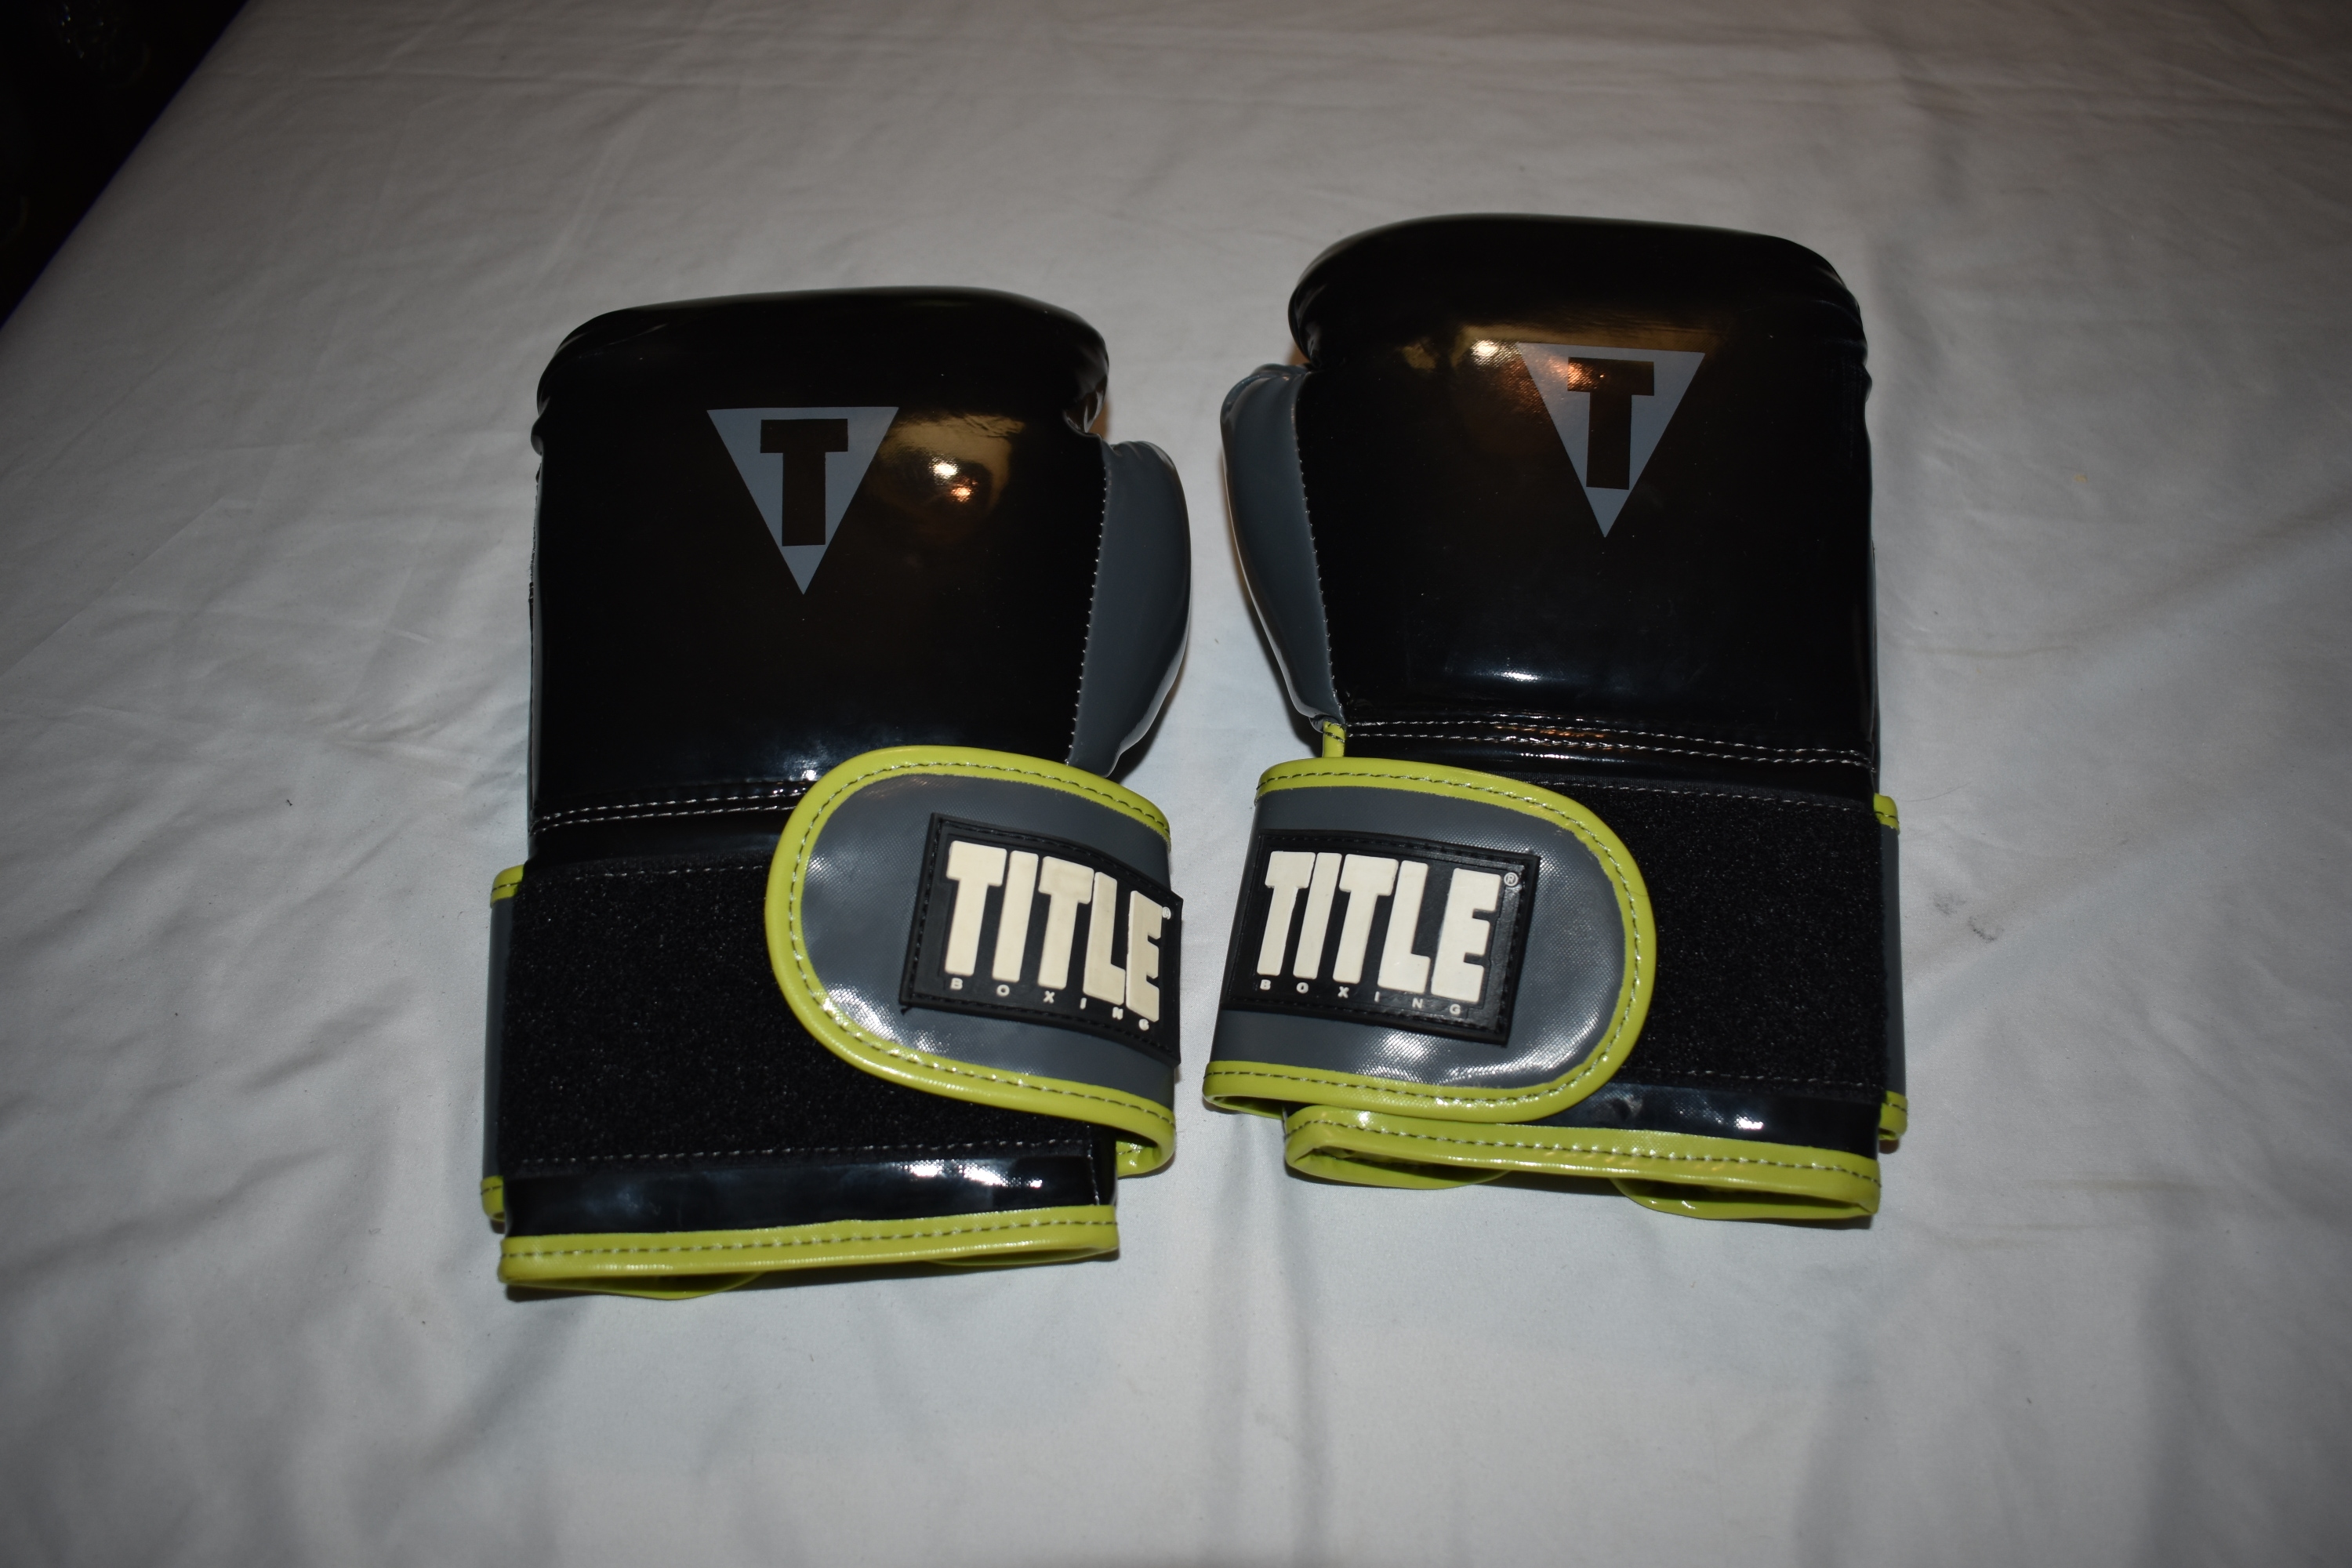 Title Aerovent Boxing / MMA Gloves, Black/Gray/Yellow, Large, Great Condition!